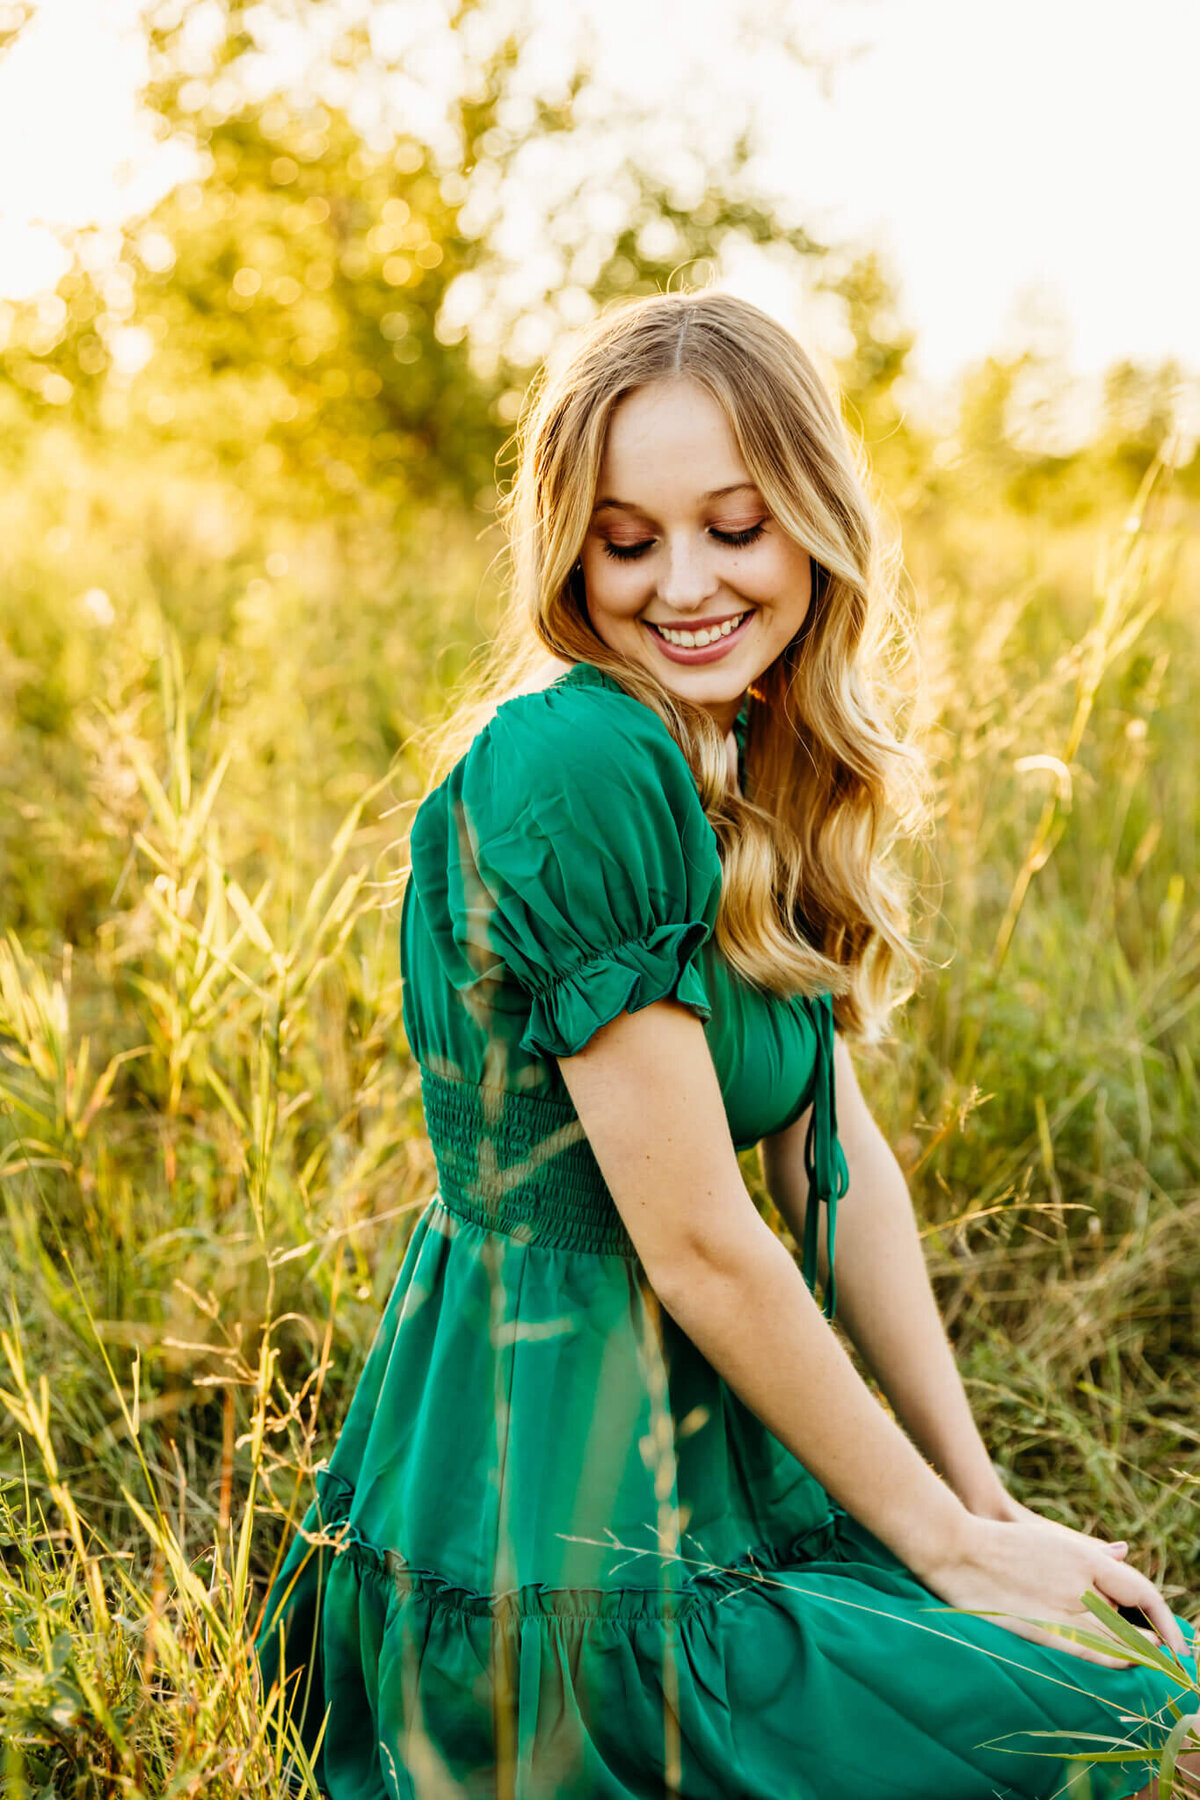 teenage girl in a green dress laughing as she glances down while sitting in a field near Oshkosh